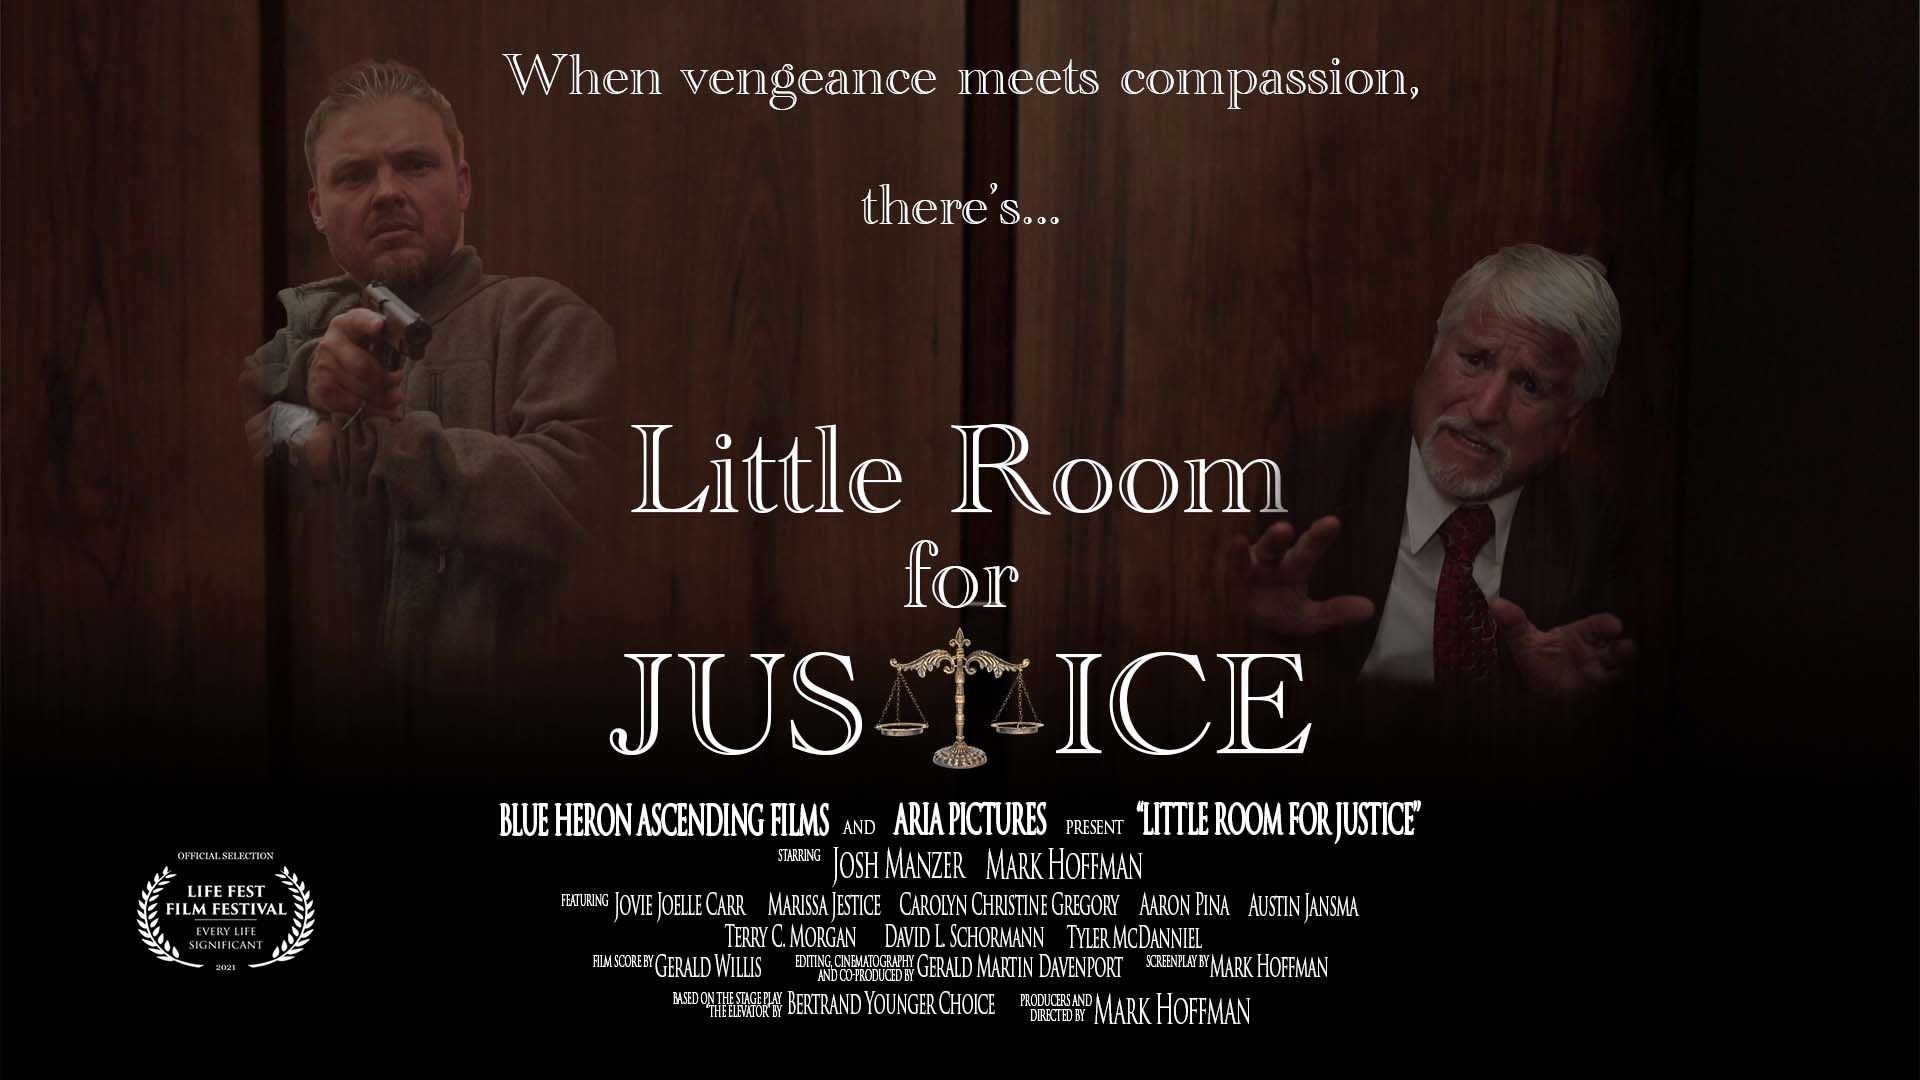 Little Room for Justice Movie poster by Mark Hoffman.